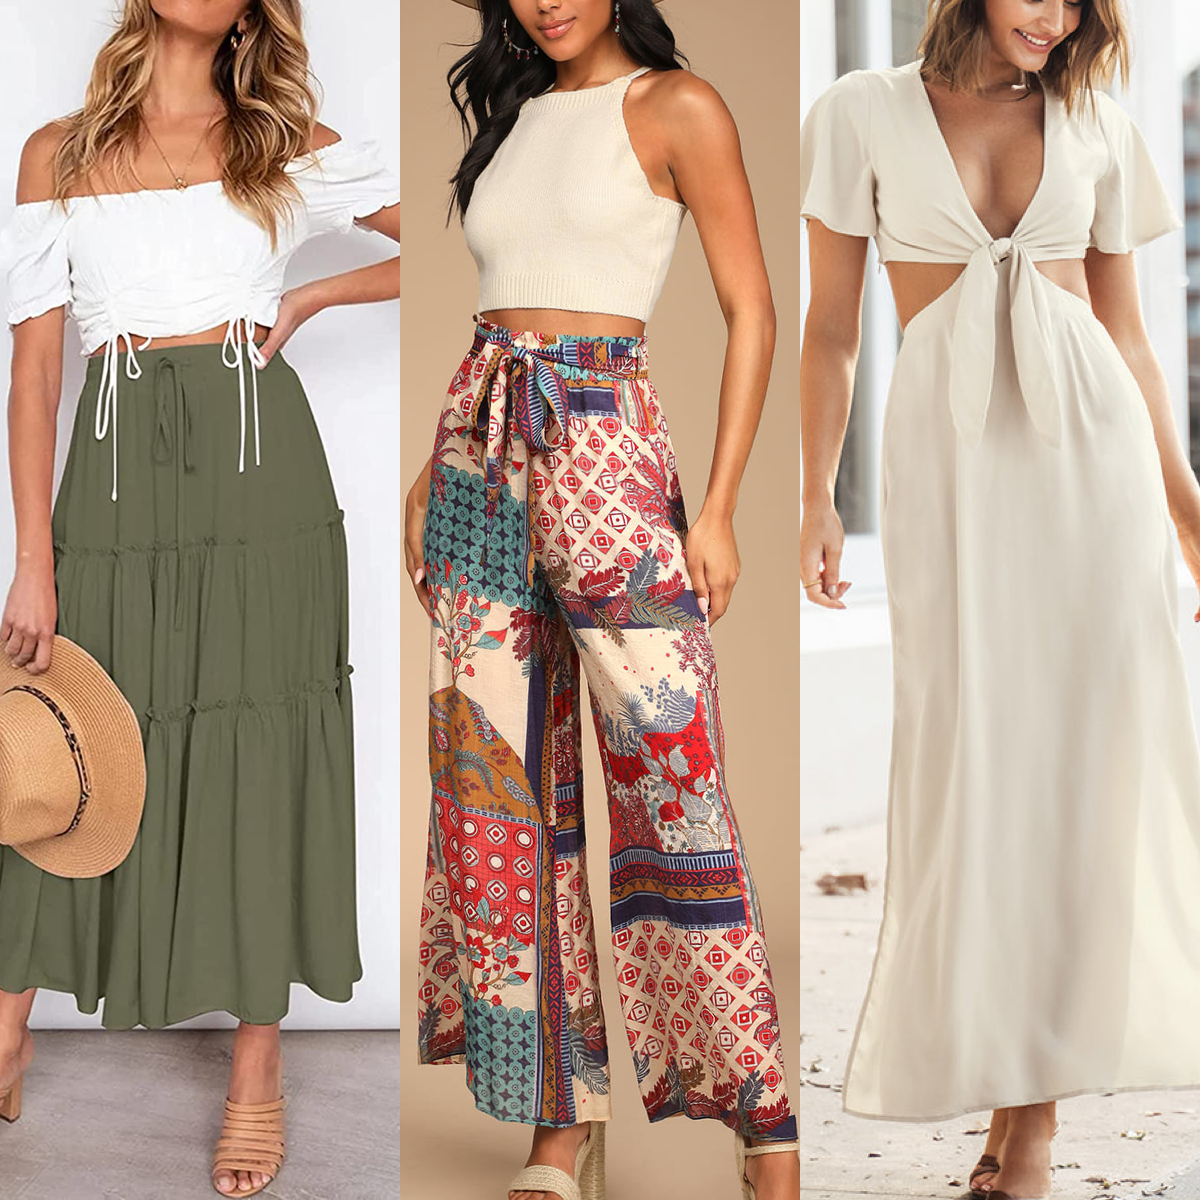 Free People Clothing Collection for Women